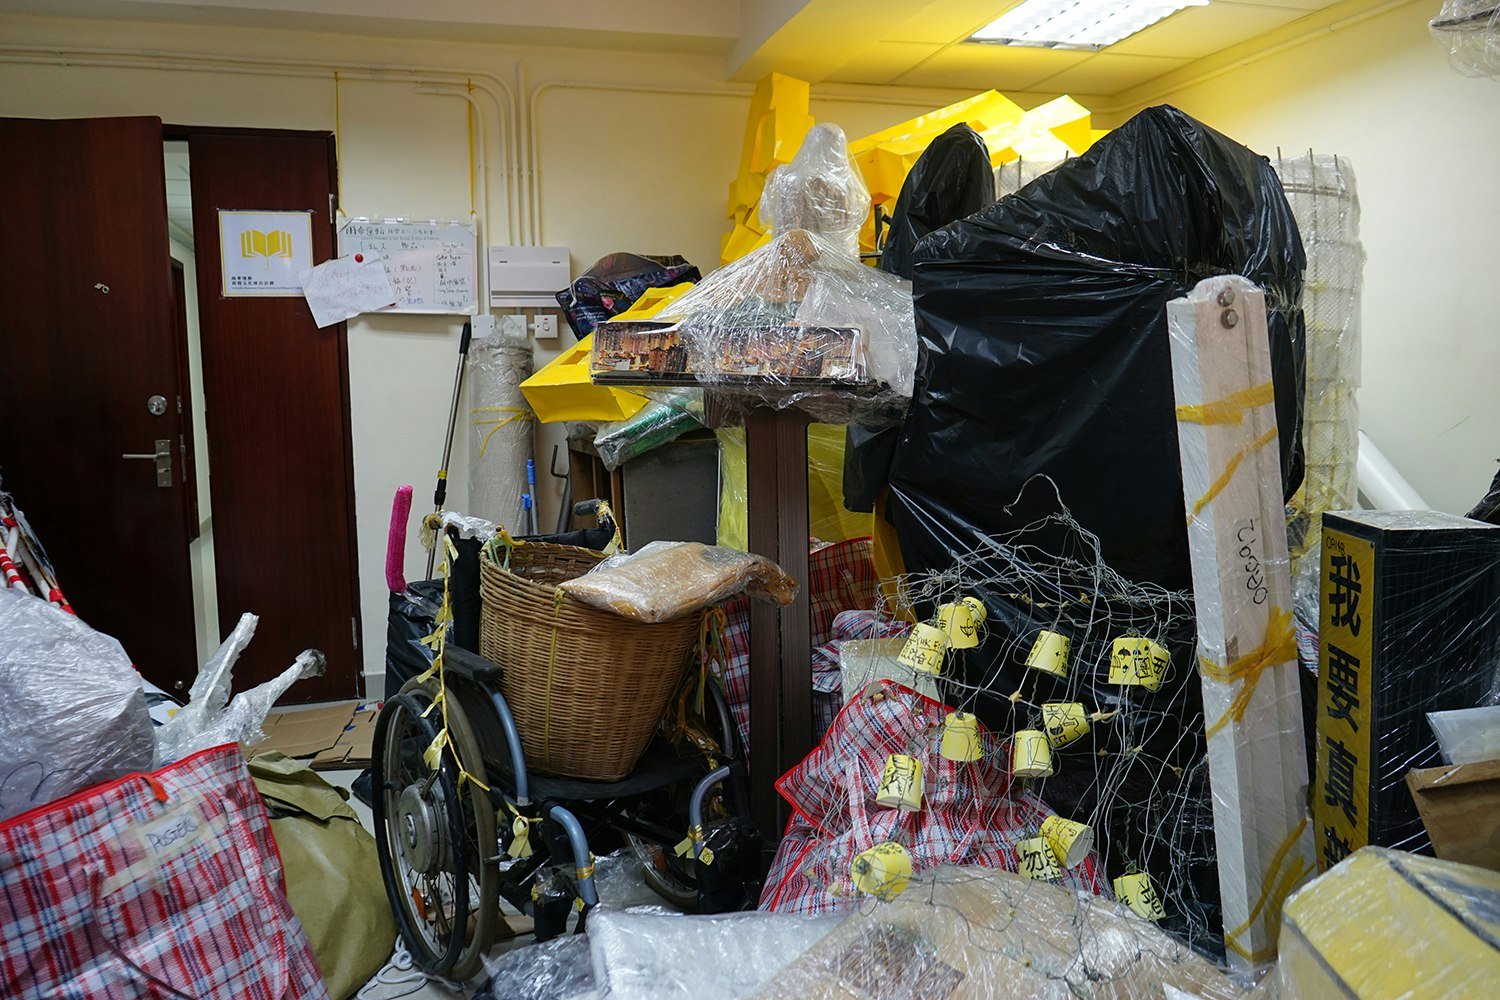 A storage space filled with plastic wrapped objects, chicken wire and and tricolour plastic bags.